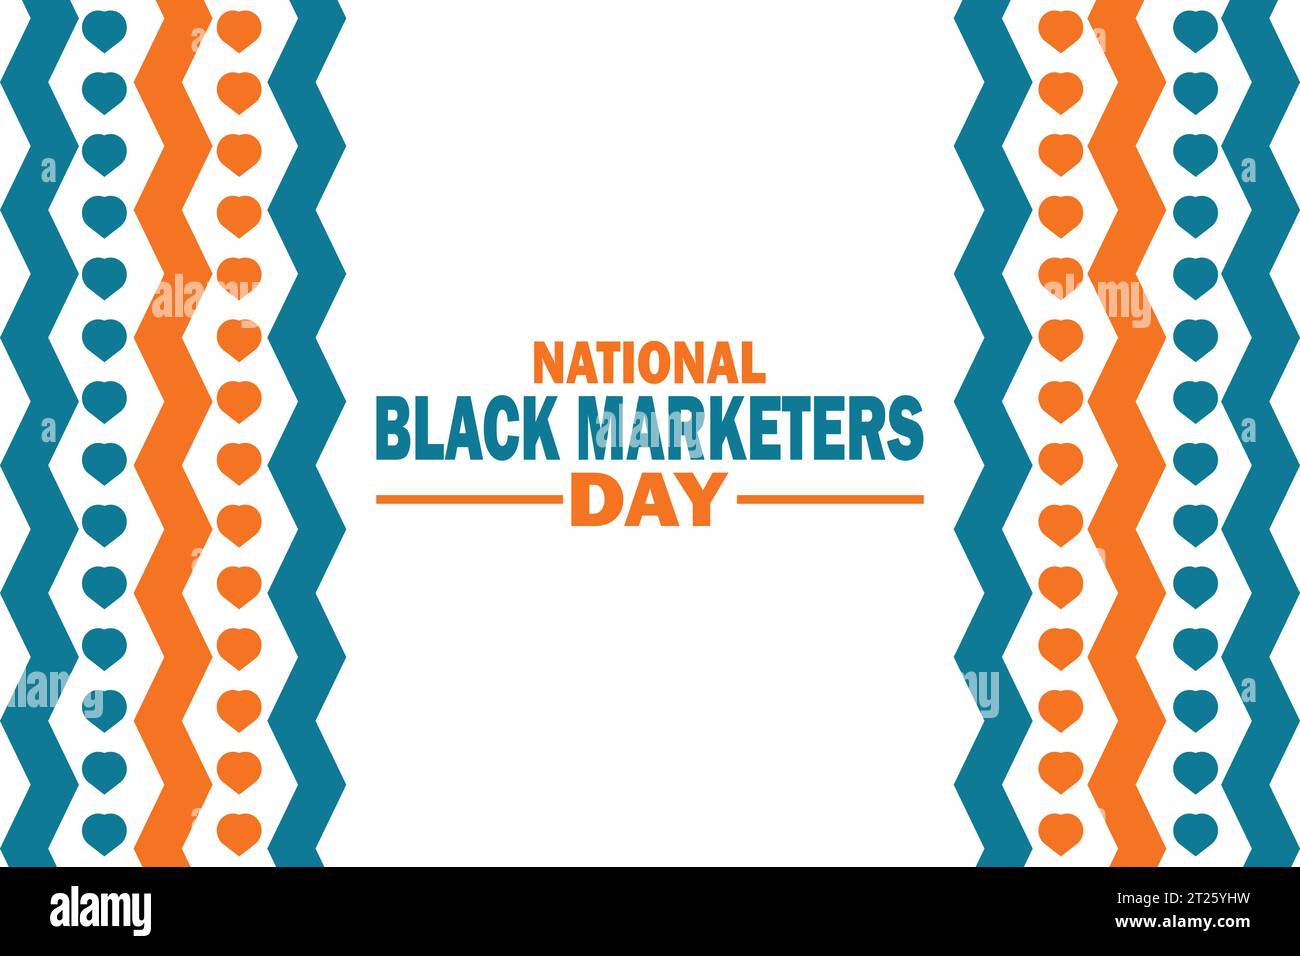 National Black Marketers Day. Holiday concept. Template for background, banner, card, poster with text inscription. Stock Vector